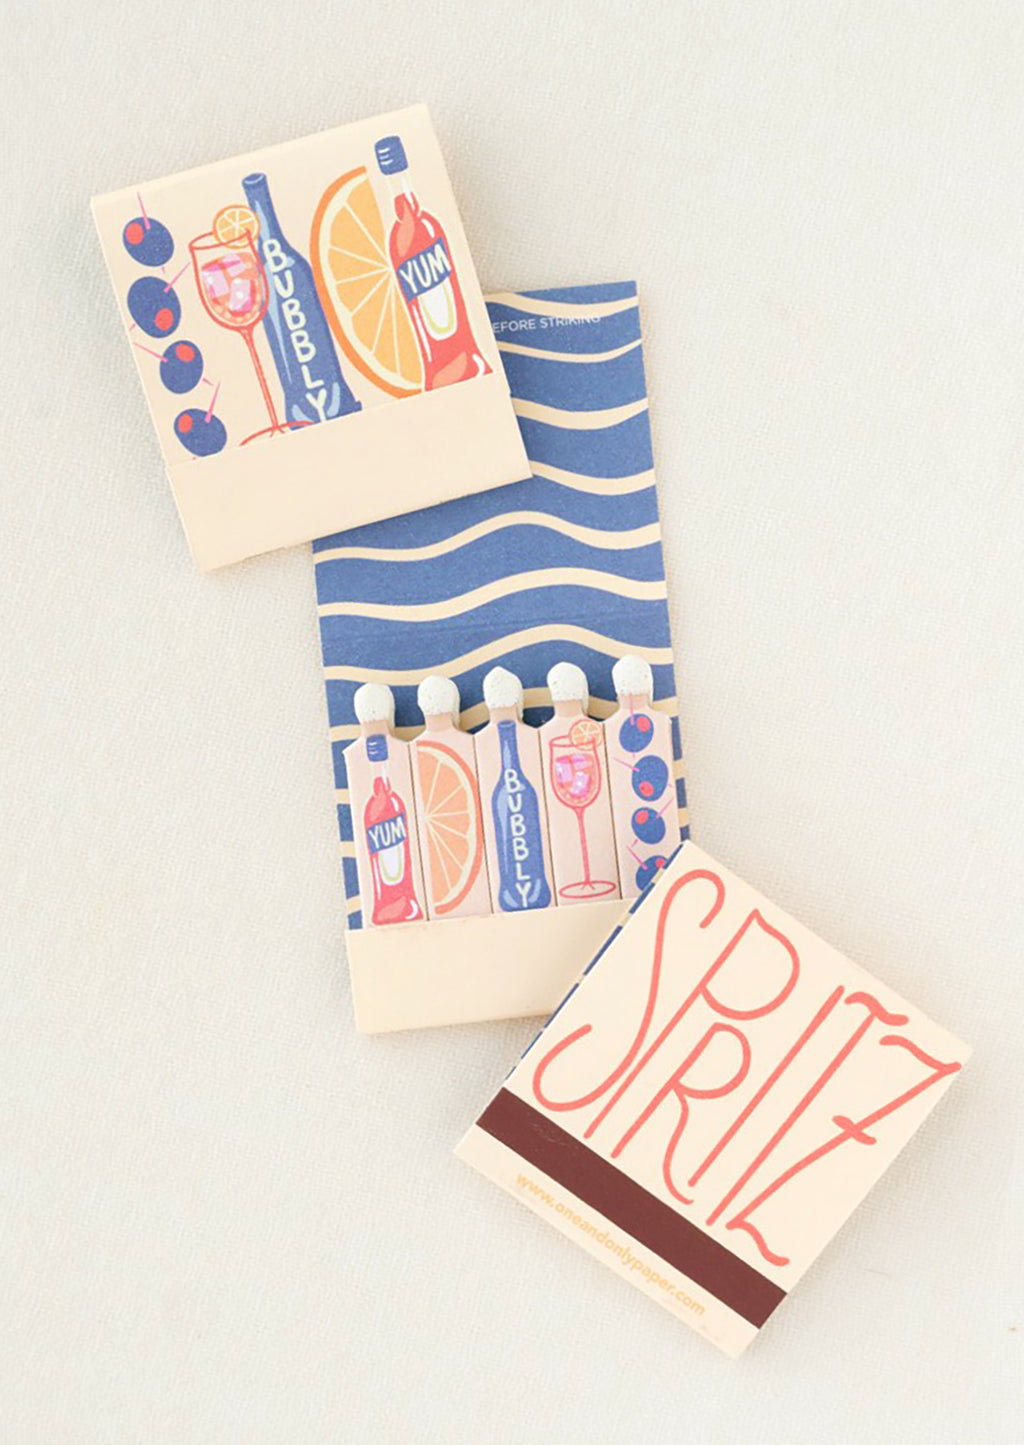 1: Printed matchbook with cocktail themed printed matches.